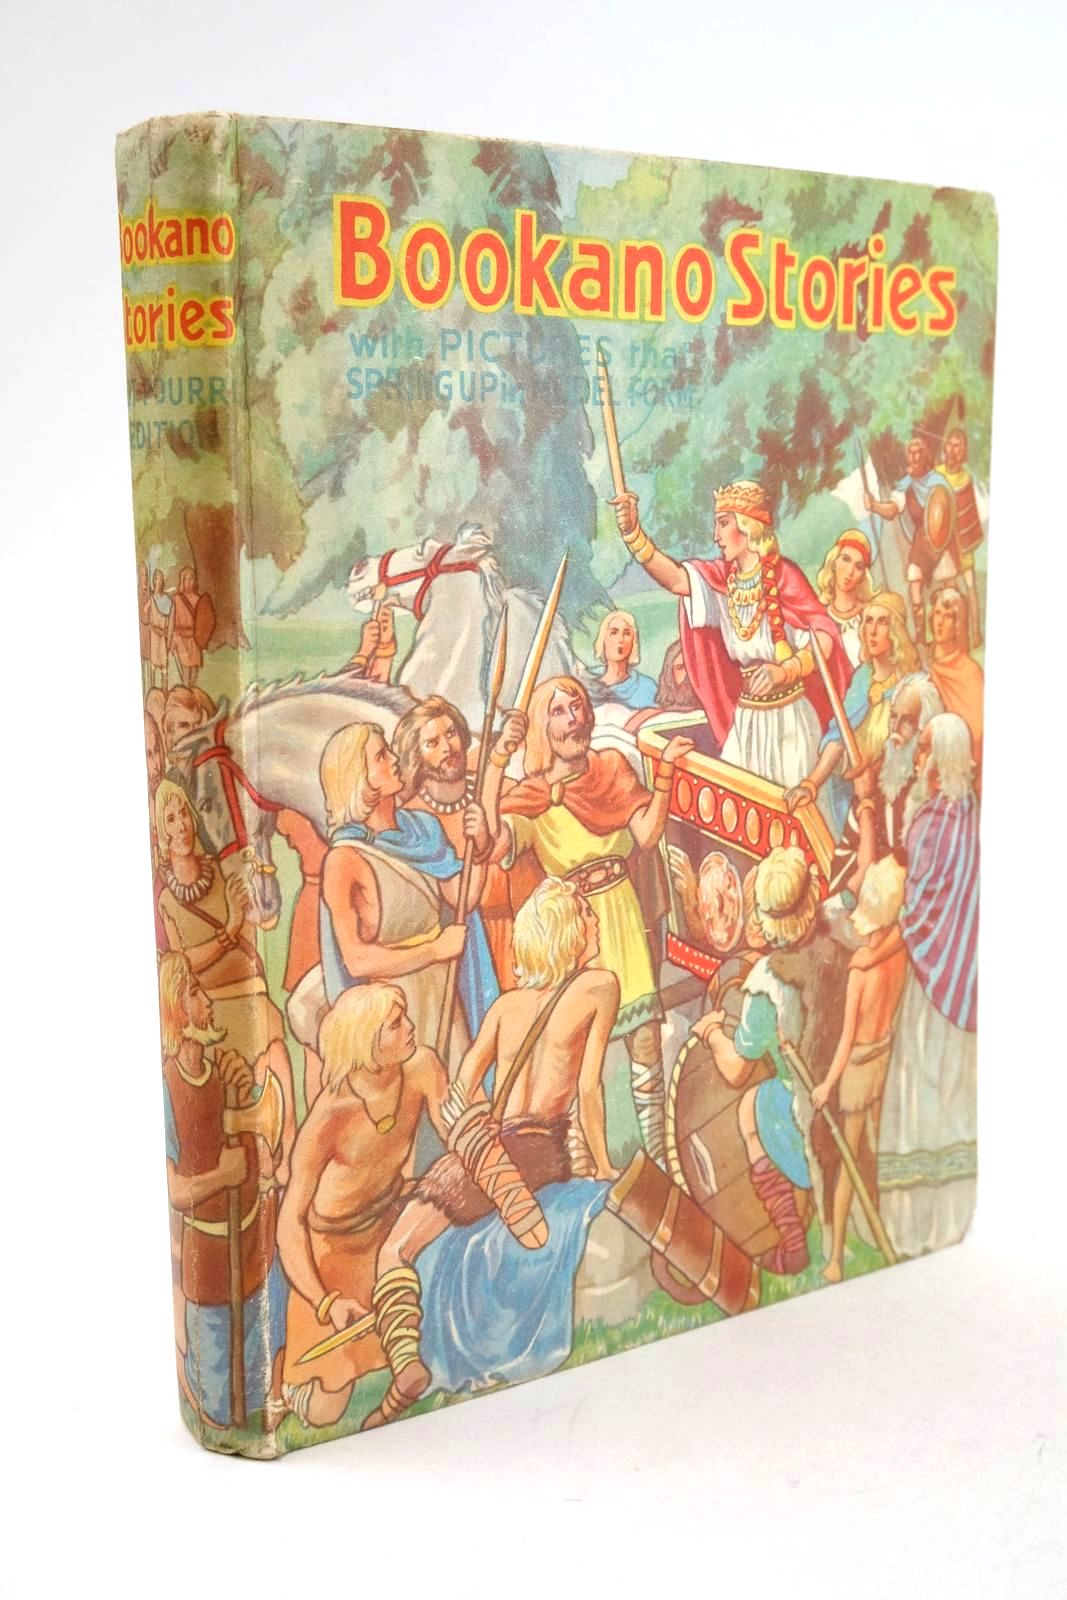 Photo of BOOKANO STORIES POT-POURRI EDITION written by Giraud, S. Louis published by Strand Publications (STOCK CODE: 1325065)  for sale by Stella & Rose's Books